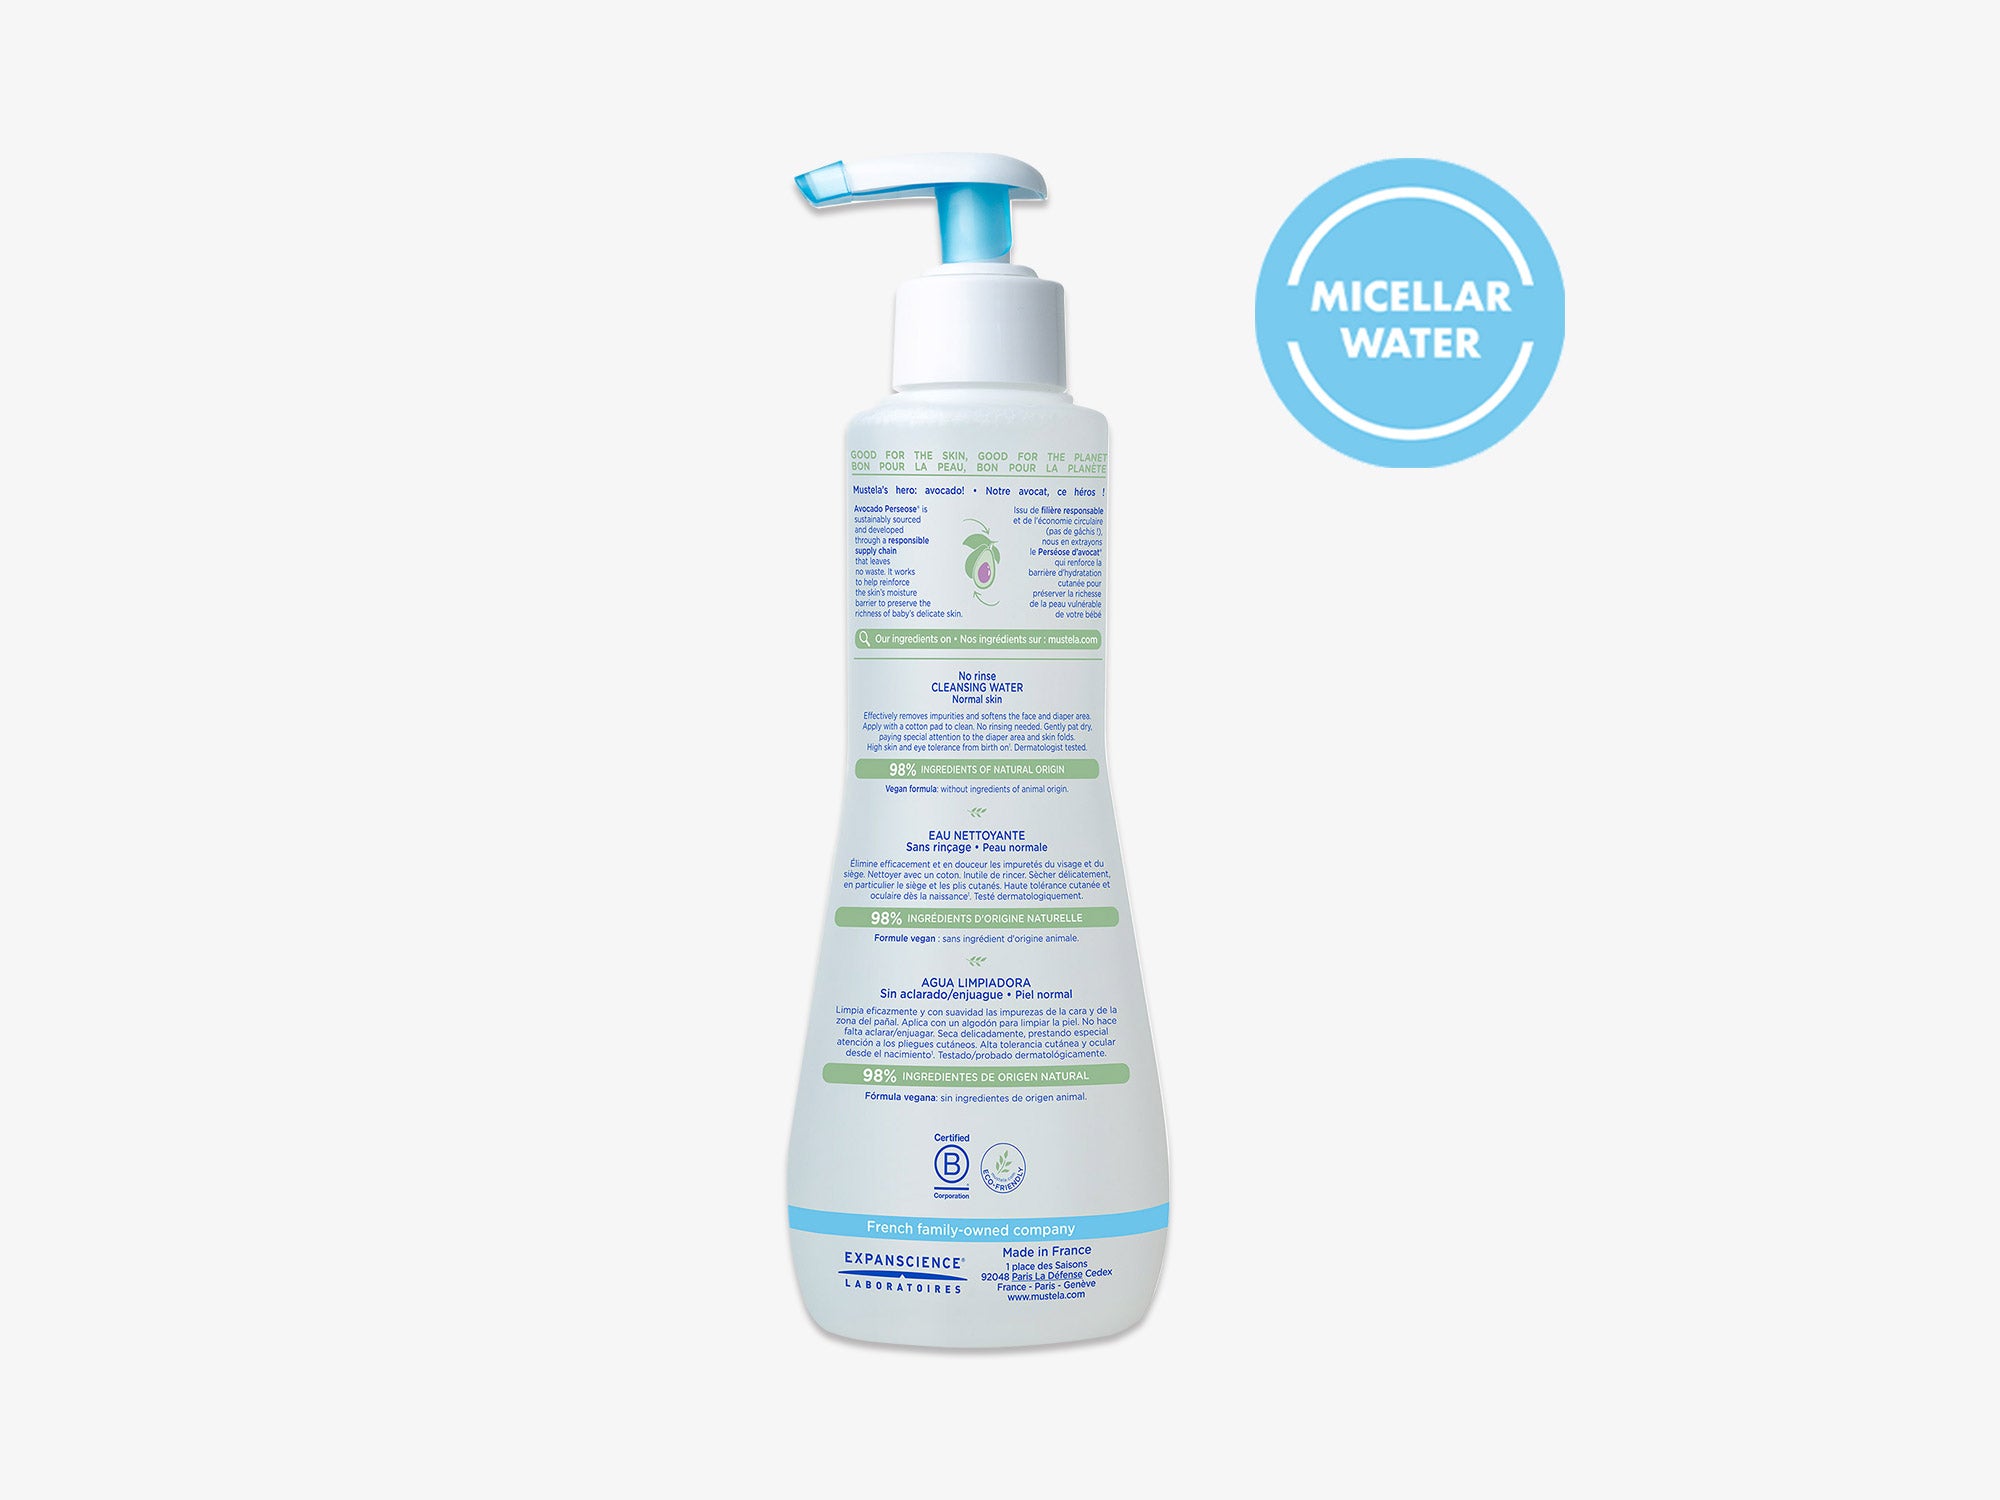 Mustela no-rinse face cleansing water for baby 750ml - Lyskin